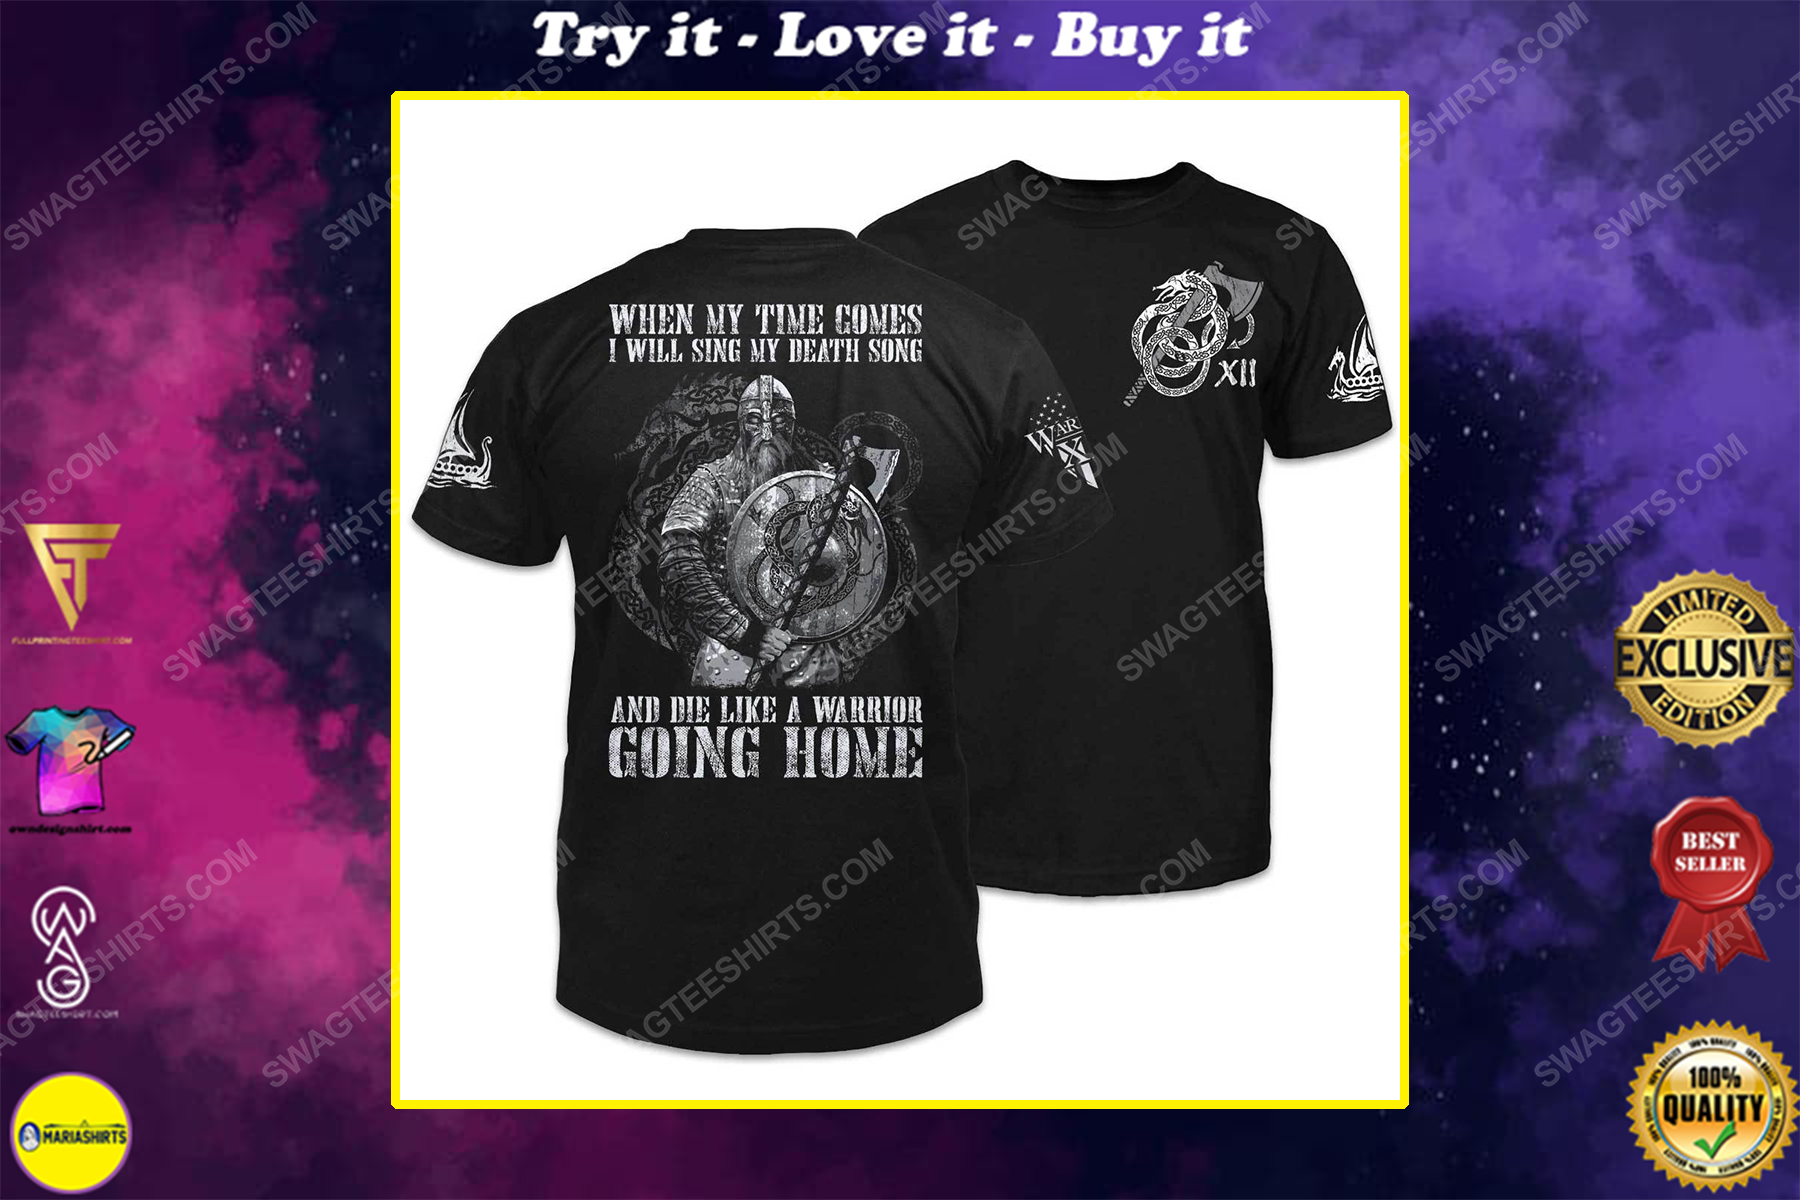 When my time comes i will sing my death song and die like a warrior going home shirt